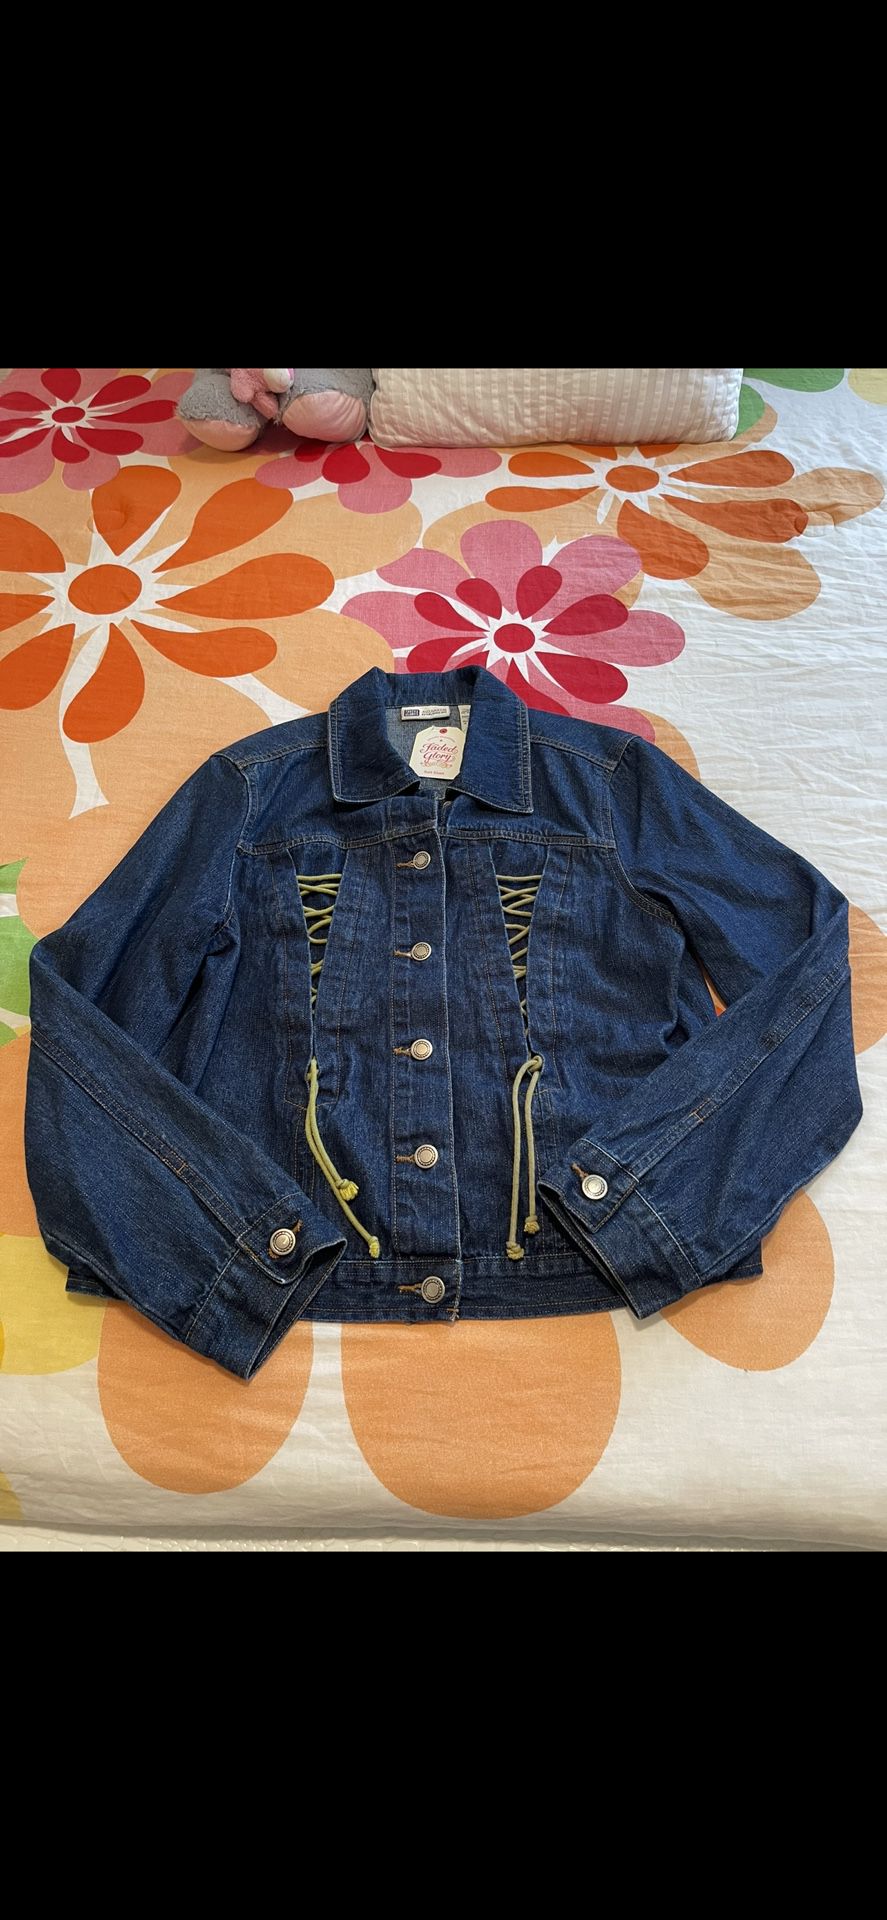 Faded Glory Jean Jacket Size Large ,,Runs small like a size medium For Ladies. 100% Cotton , New Whit Tags Original 